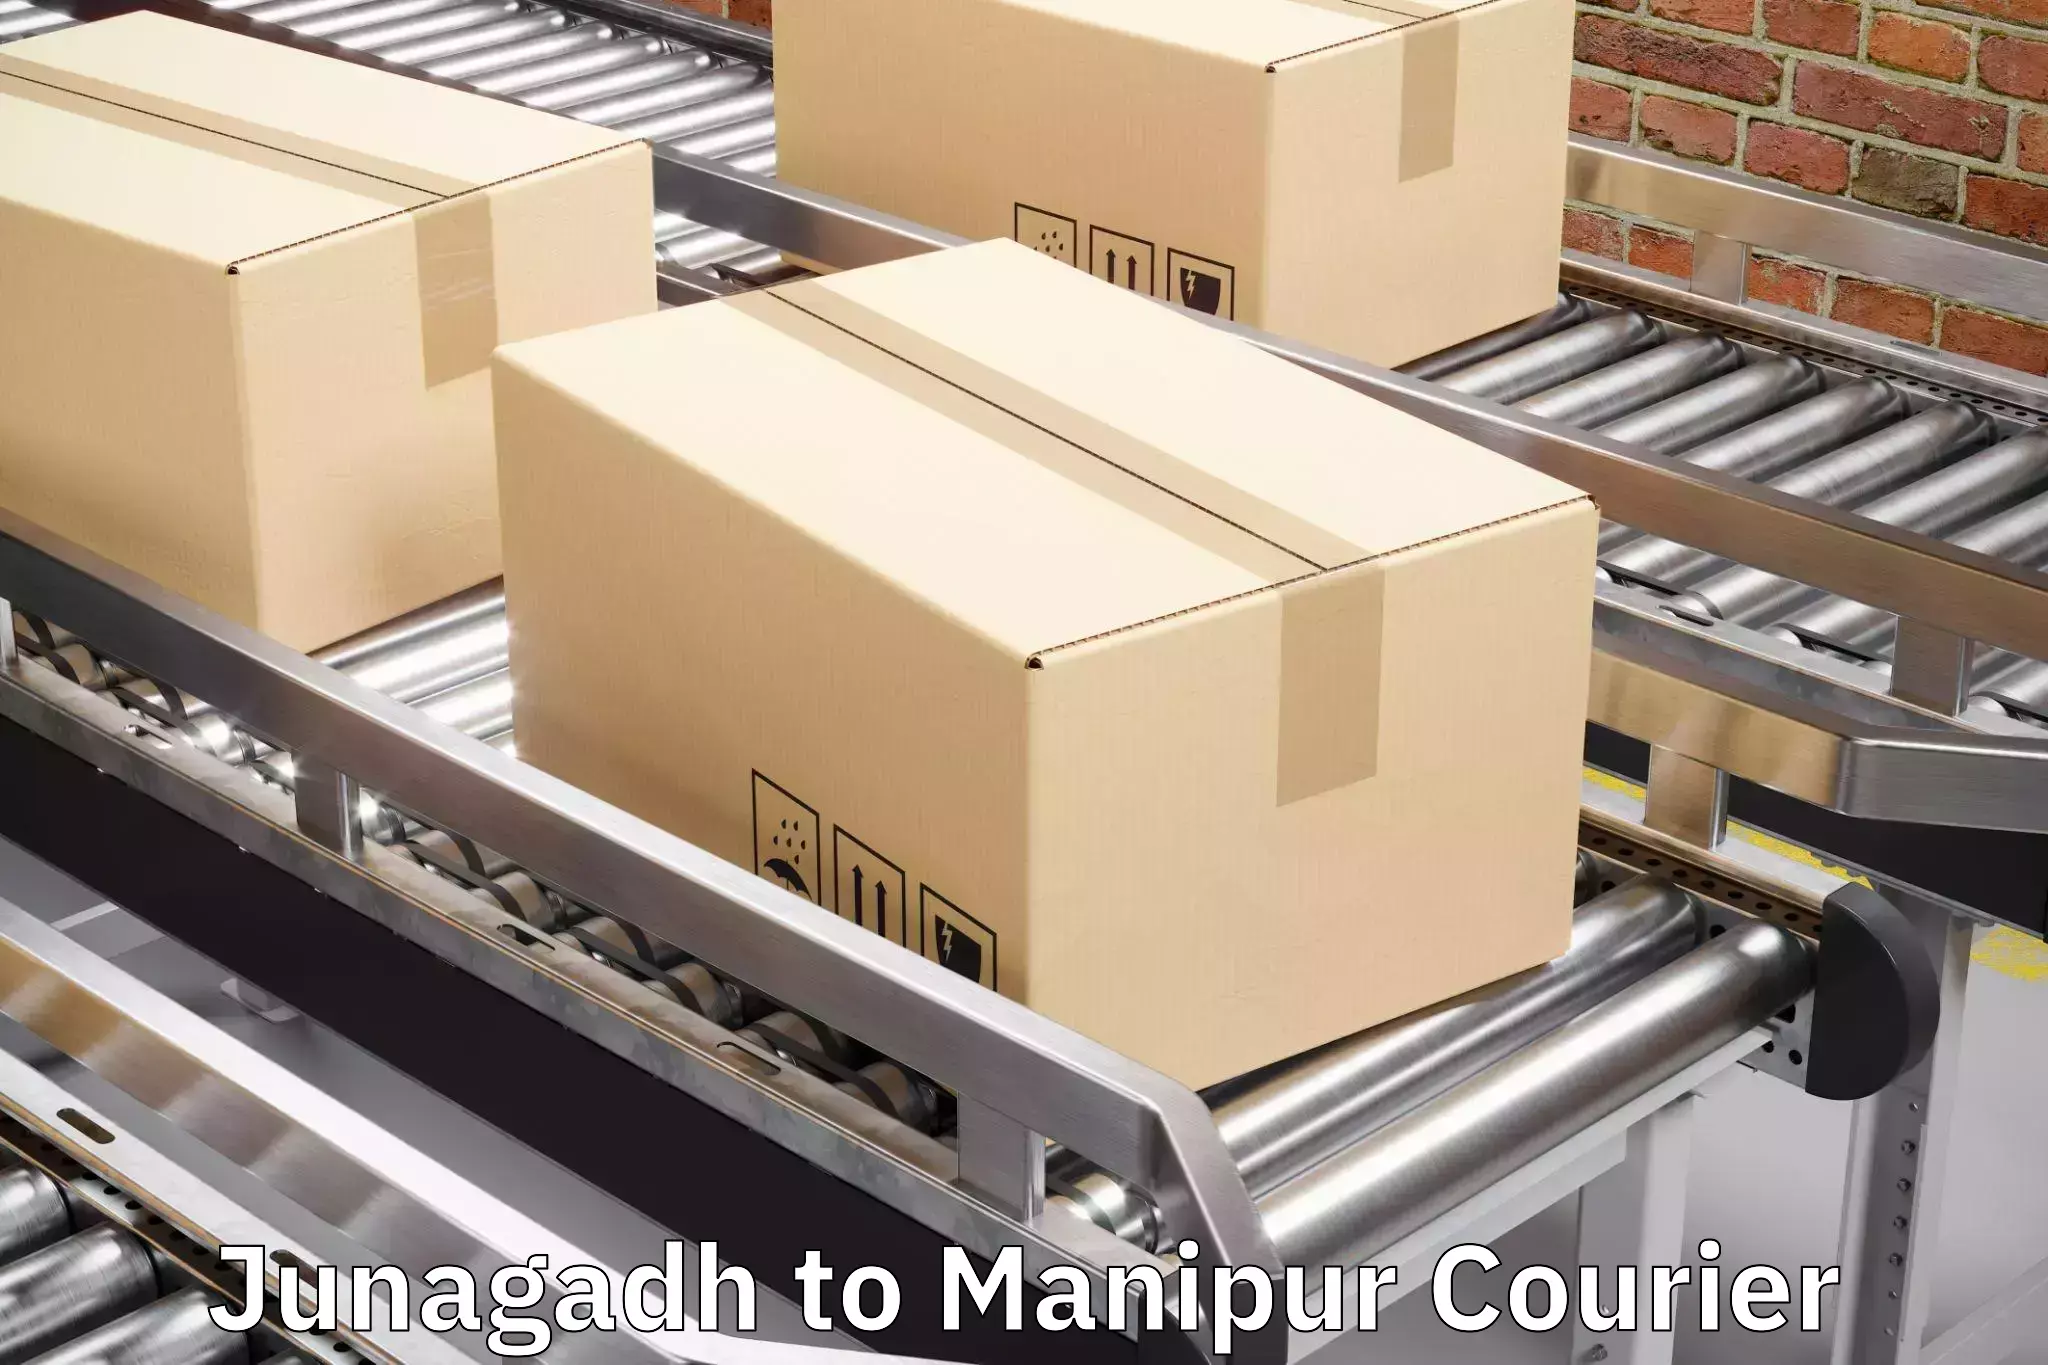 Luggage shipment specialists Junagadh to Imphal